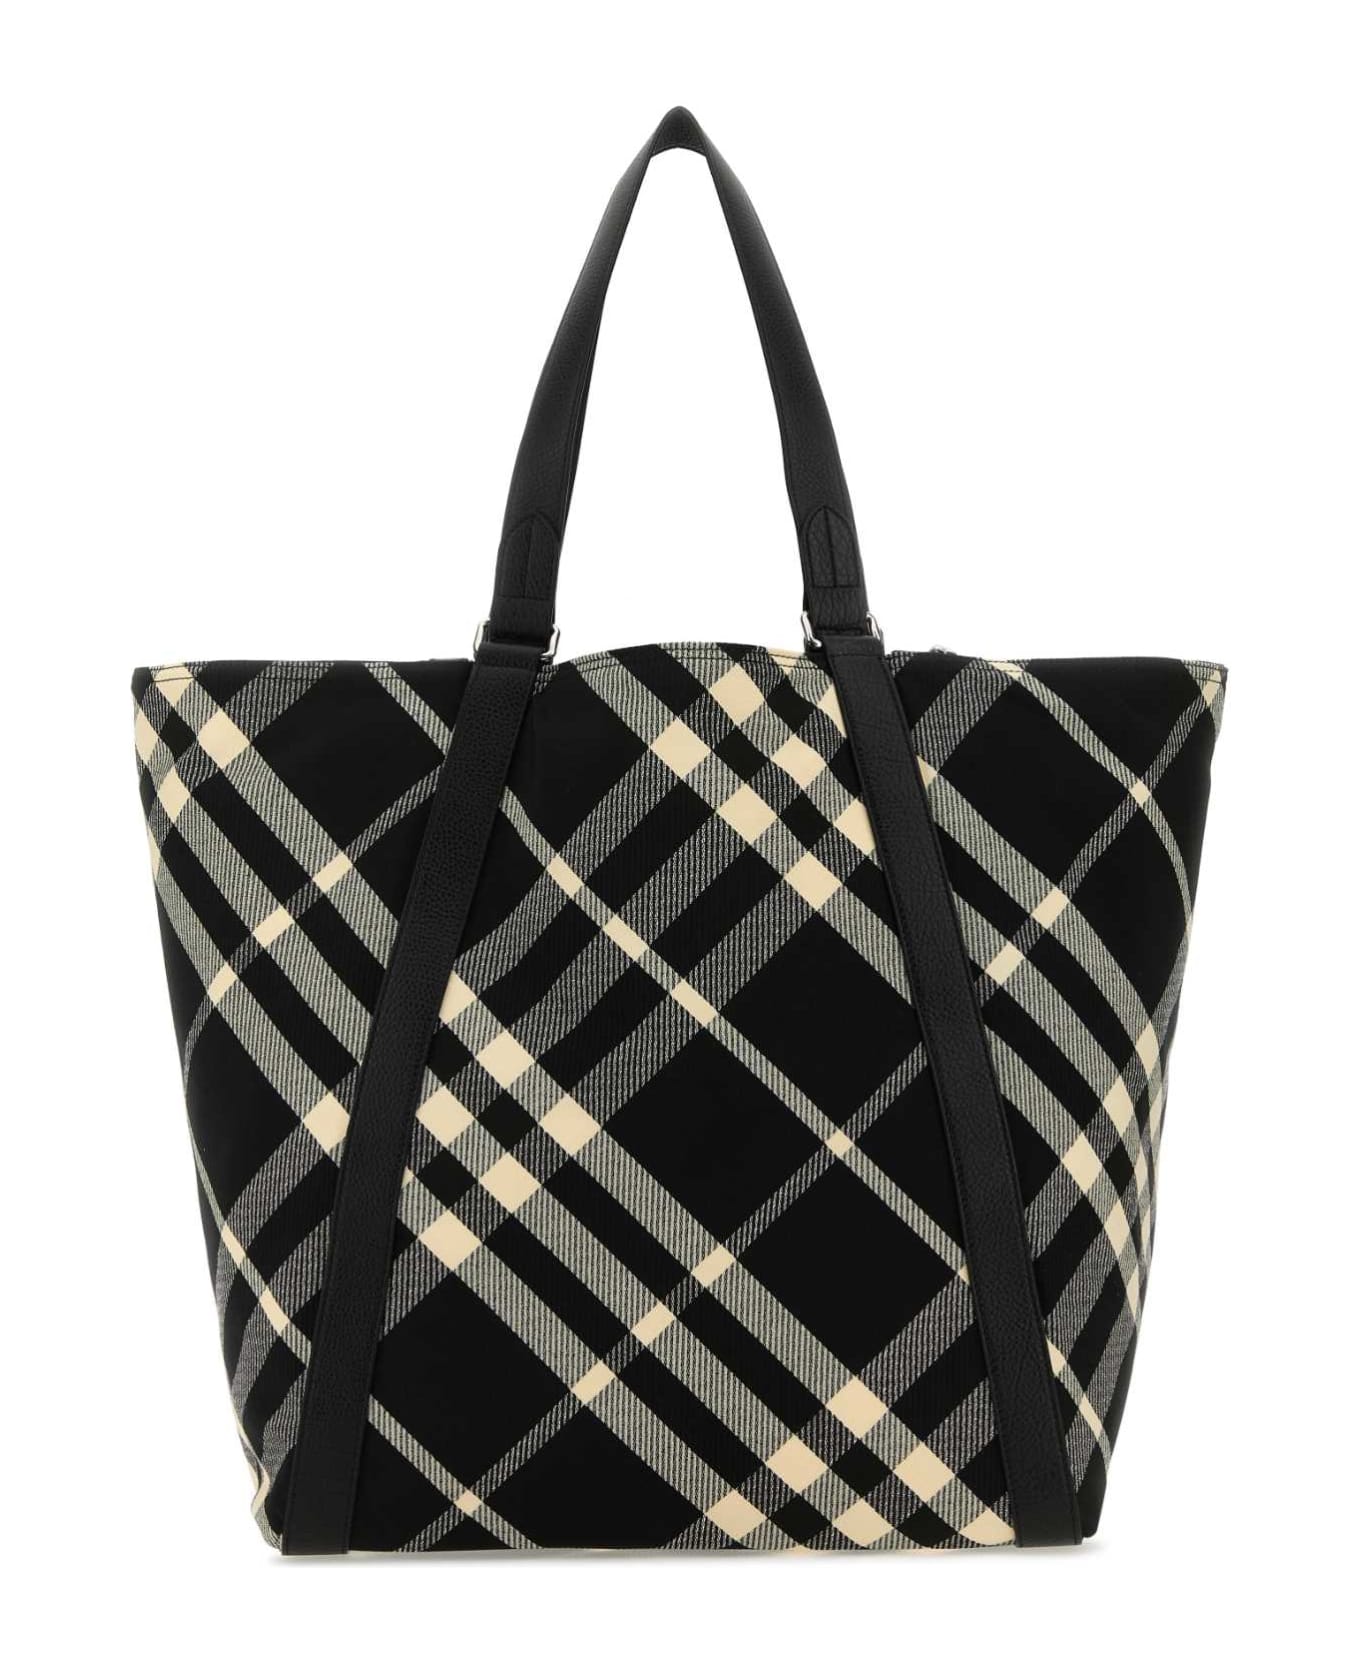 Burberry Embroidered Fabric Festival Shopping Bag - BLACKCALICO